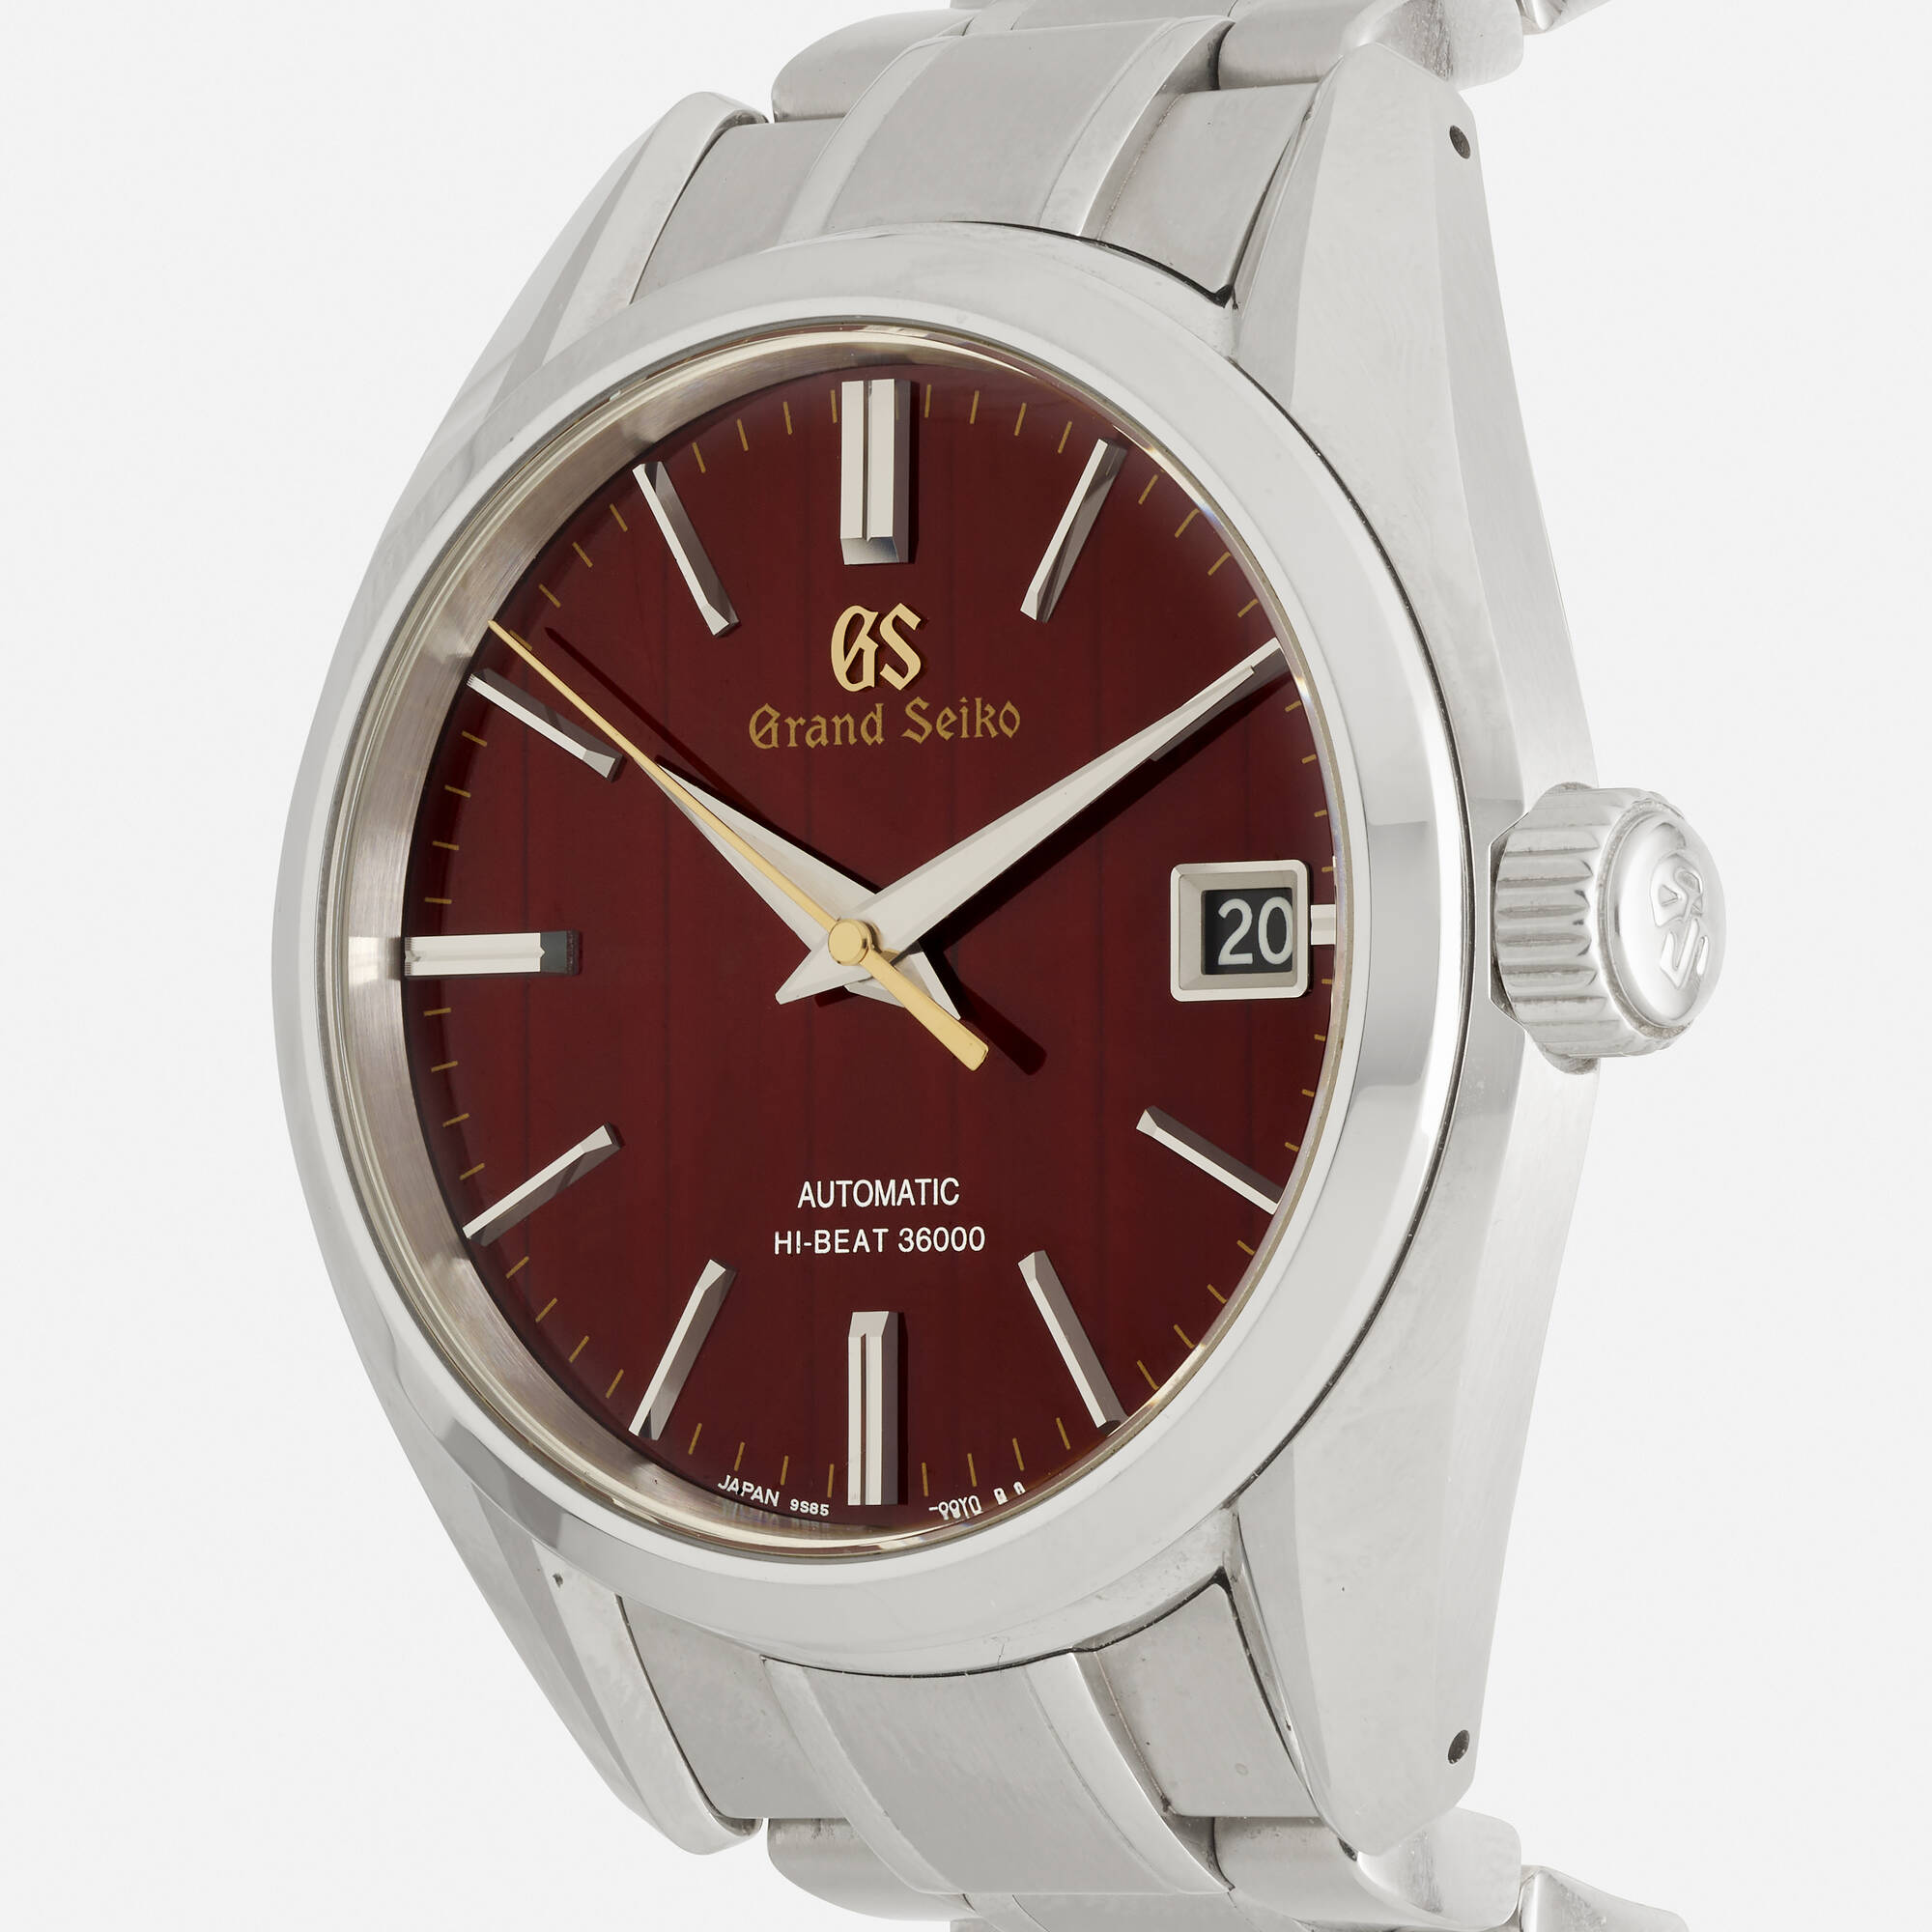 113: GRAND SEIKO, 'Seasons Autumn' stainless steel wristwatch, Ref. SBGH269  < Watches, 29 June 2022 < Auctions | Wright: Auctions of Art and Design